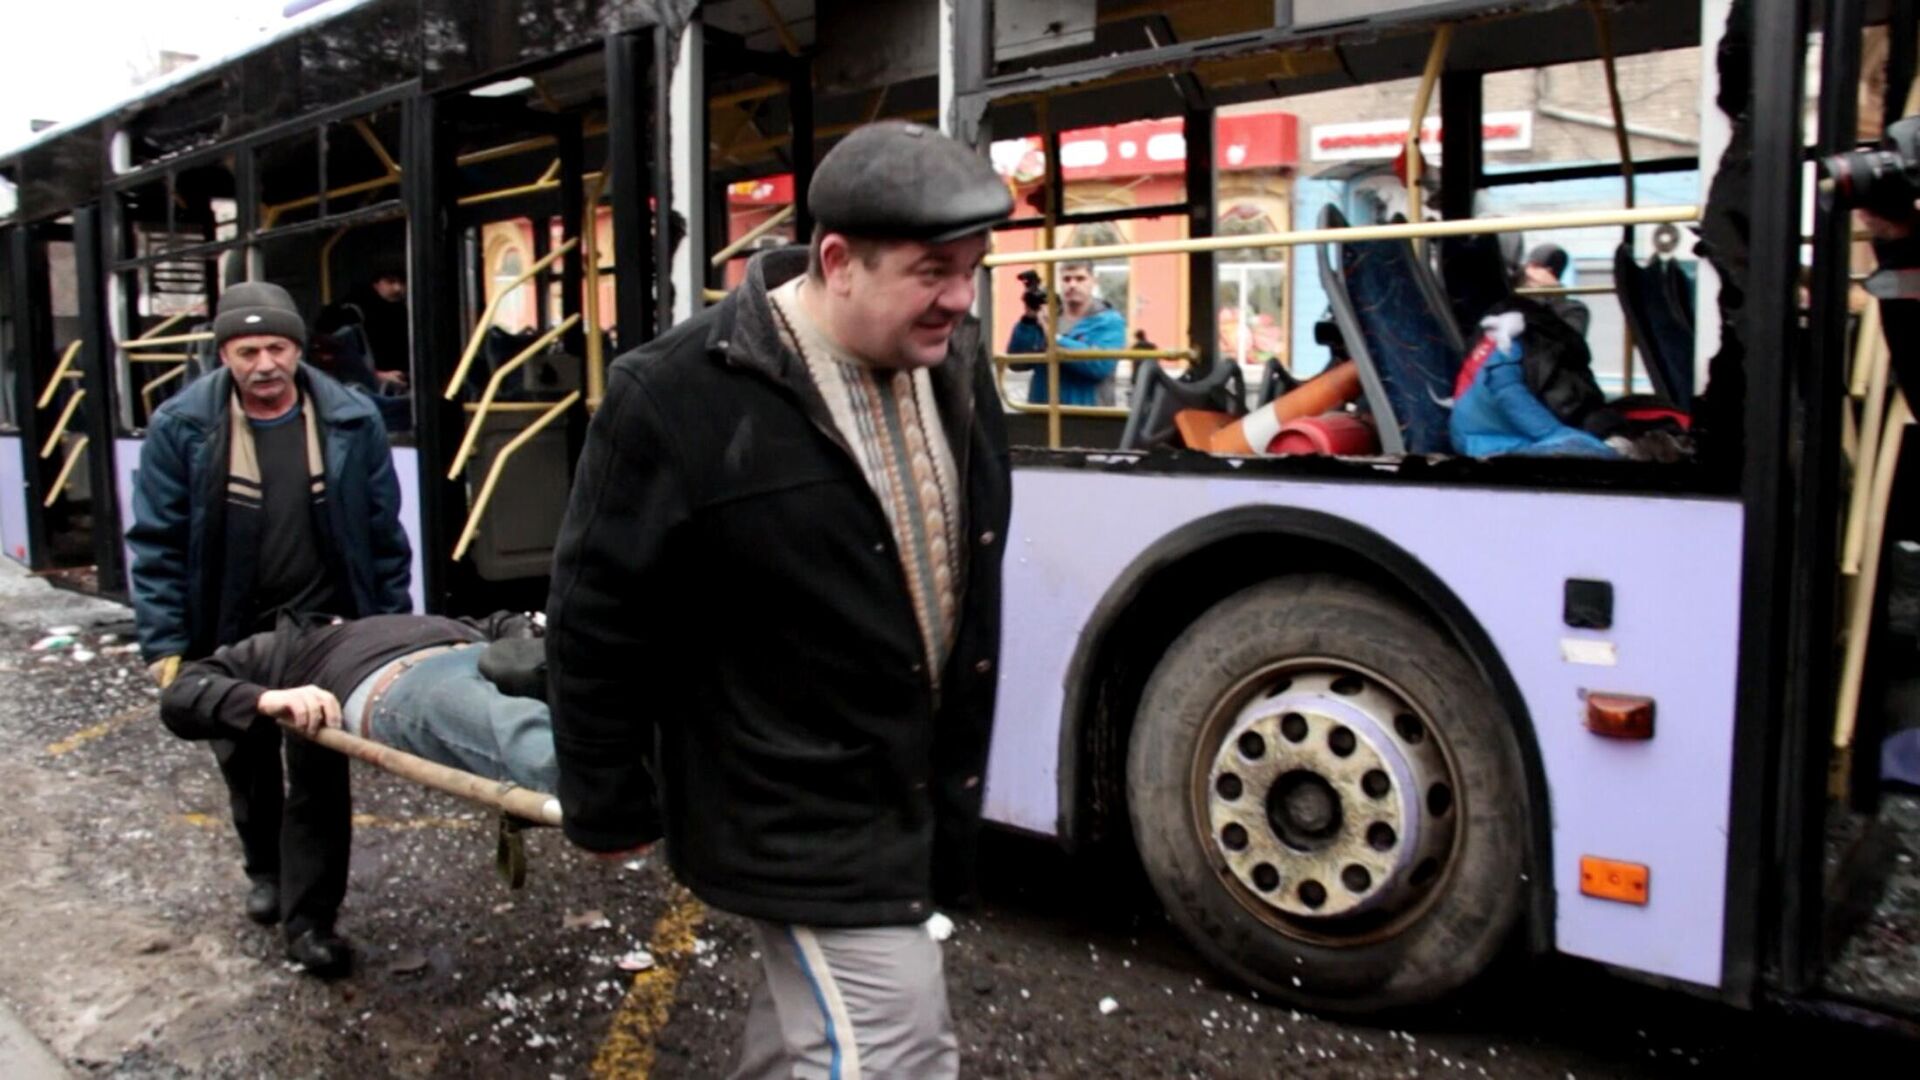 Residents of Donetsk take a victim out of a bus in wake of Ukrainian shelling of a bus stop in the city's Leninsky district. January 2015. Screengrab of Ruptly video. - Sputnik International, 1920, 16.04.2022